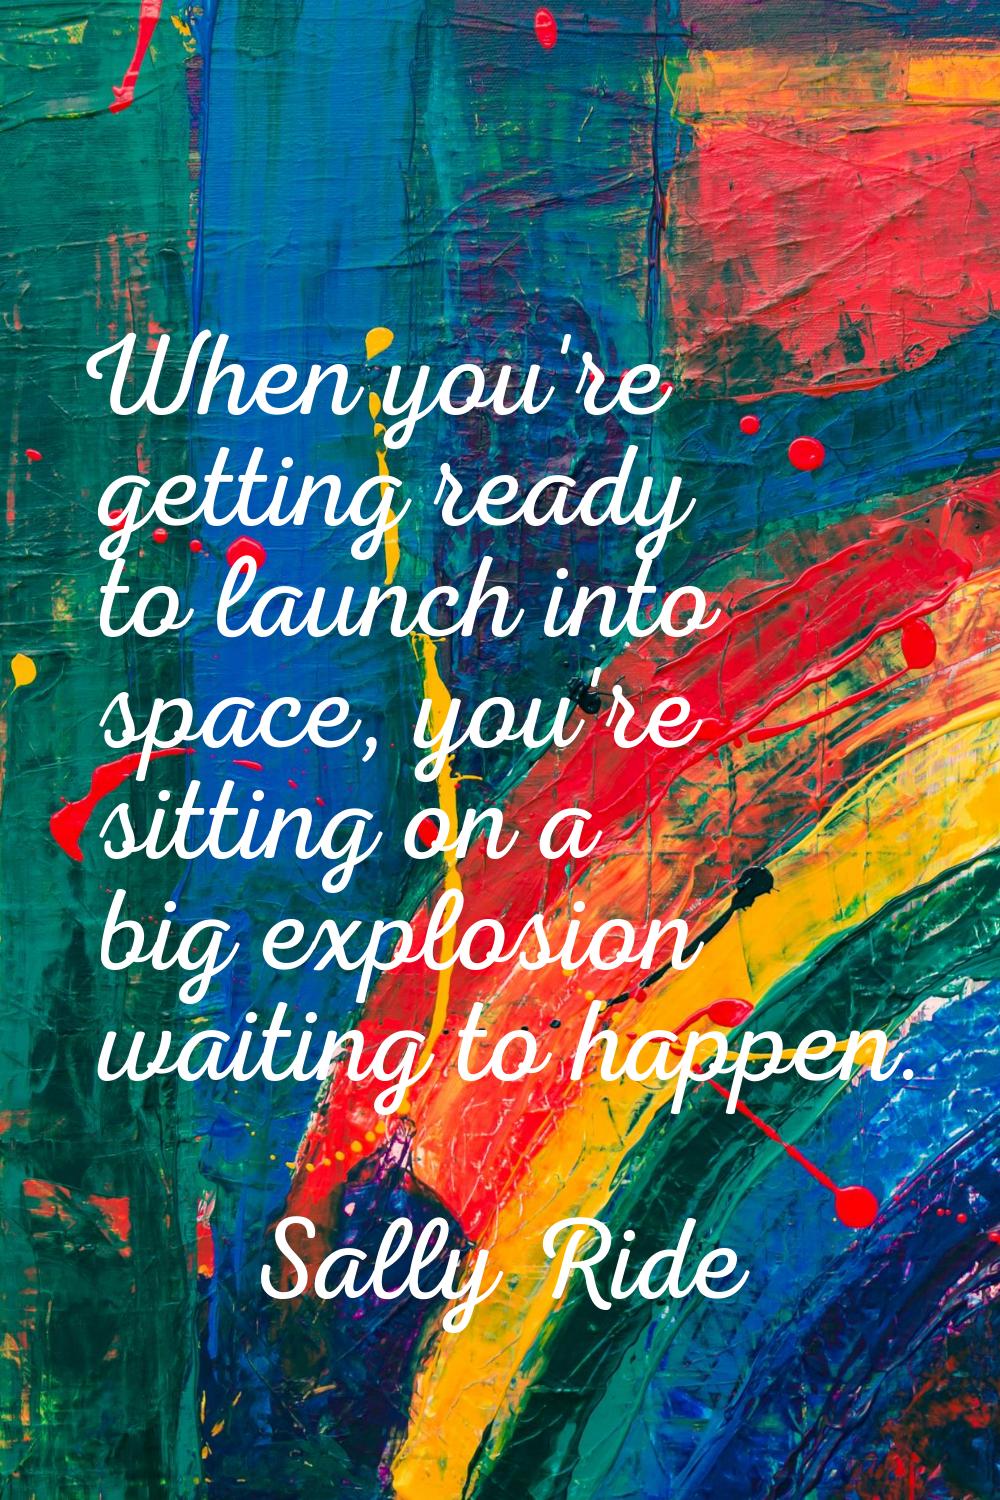 When you're getting ready to launch into space, you're sitting on a big explosion waiting to happen